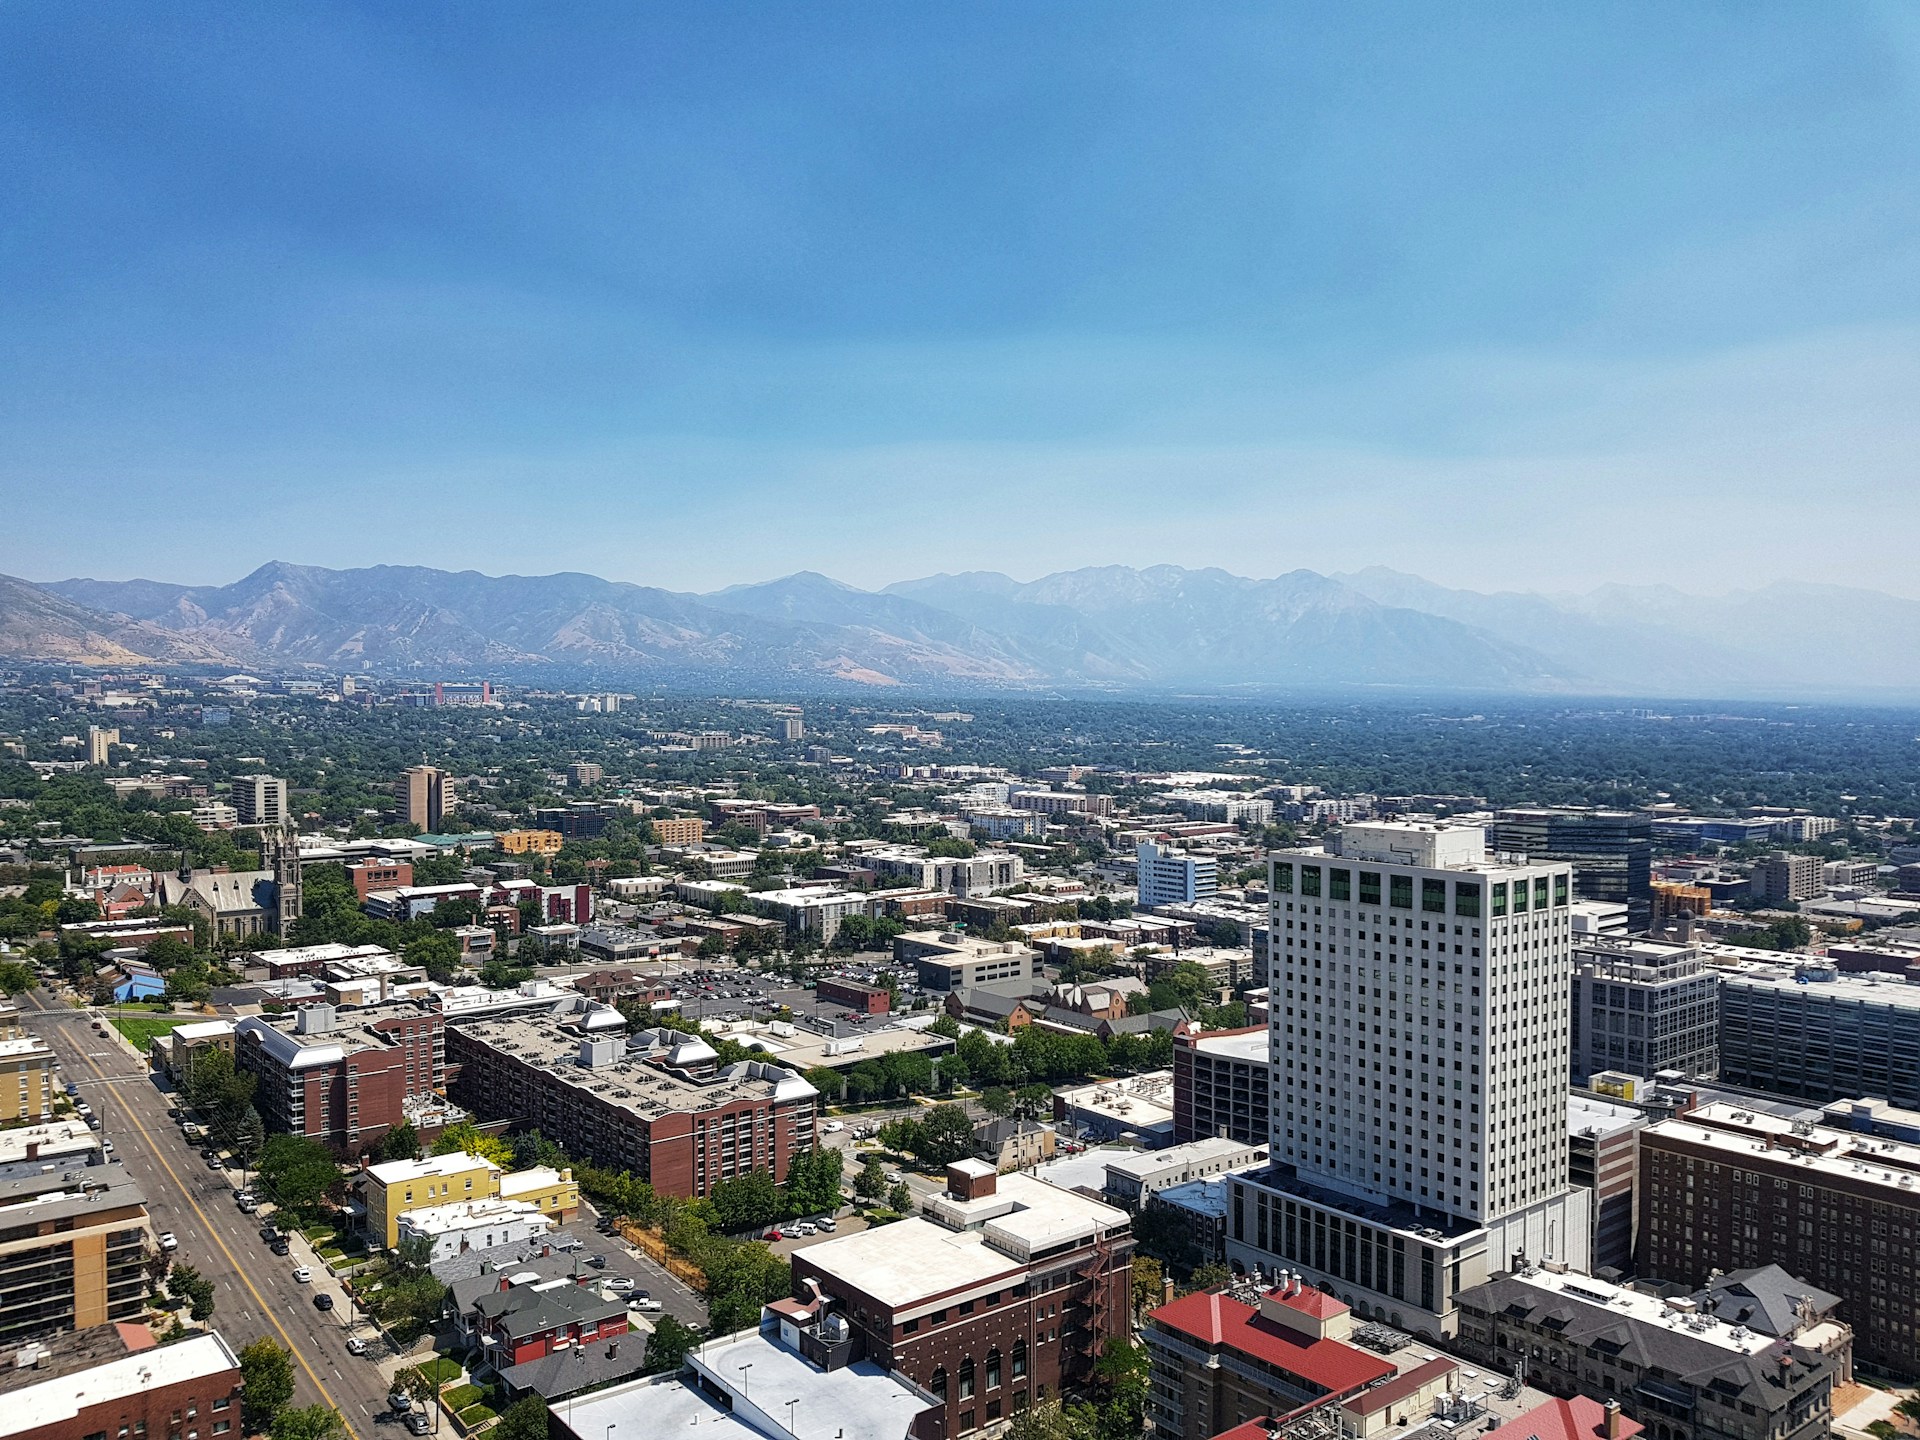 Aerial view of Salt Lake City with haze in the distance